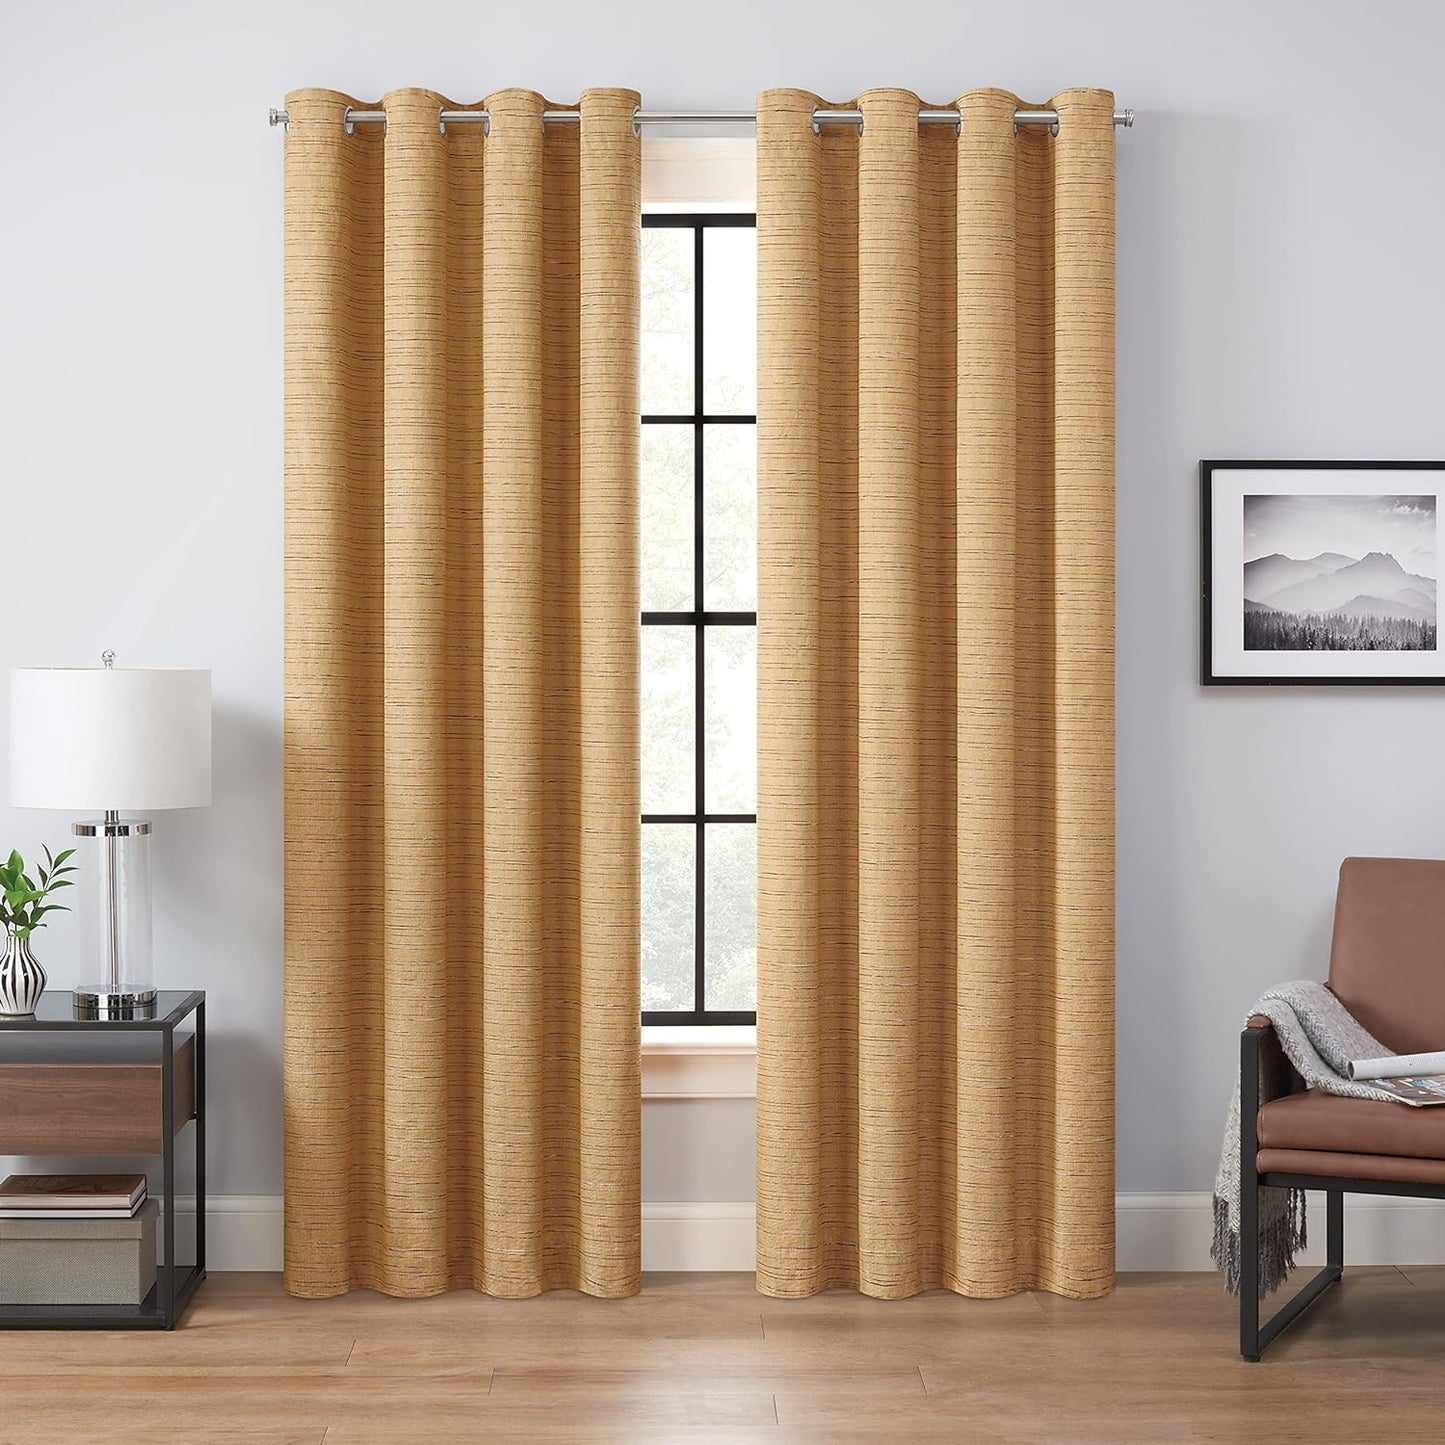 Eclipse Cannes Magnitech 100% Blackout Curtain, Rod Pocket Window Curtain Panel, Seamless Magnetic Closure for Bedroom, Living Room or Nursery, 63 in Long X 40 in Wide, (1 Panel), Ivory  KEECO Honey Grommet 50X63